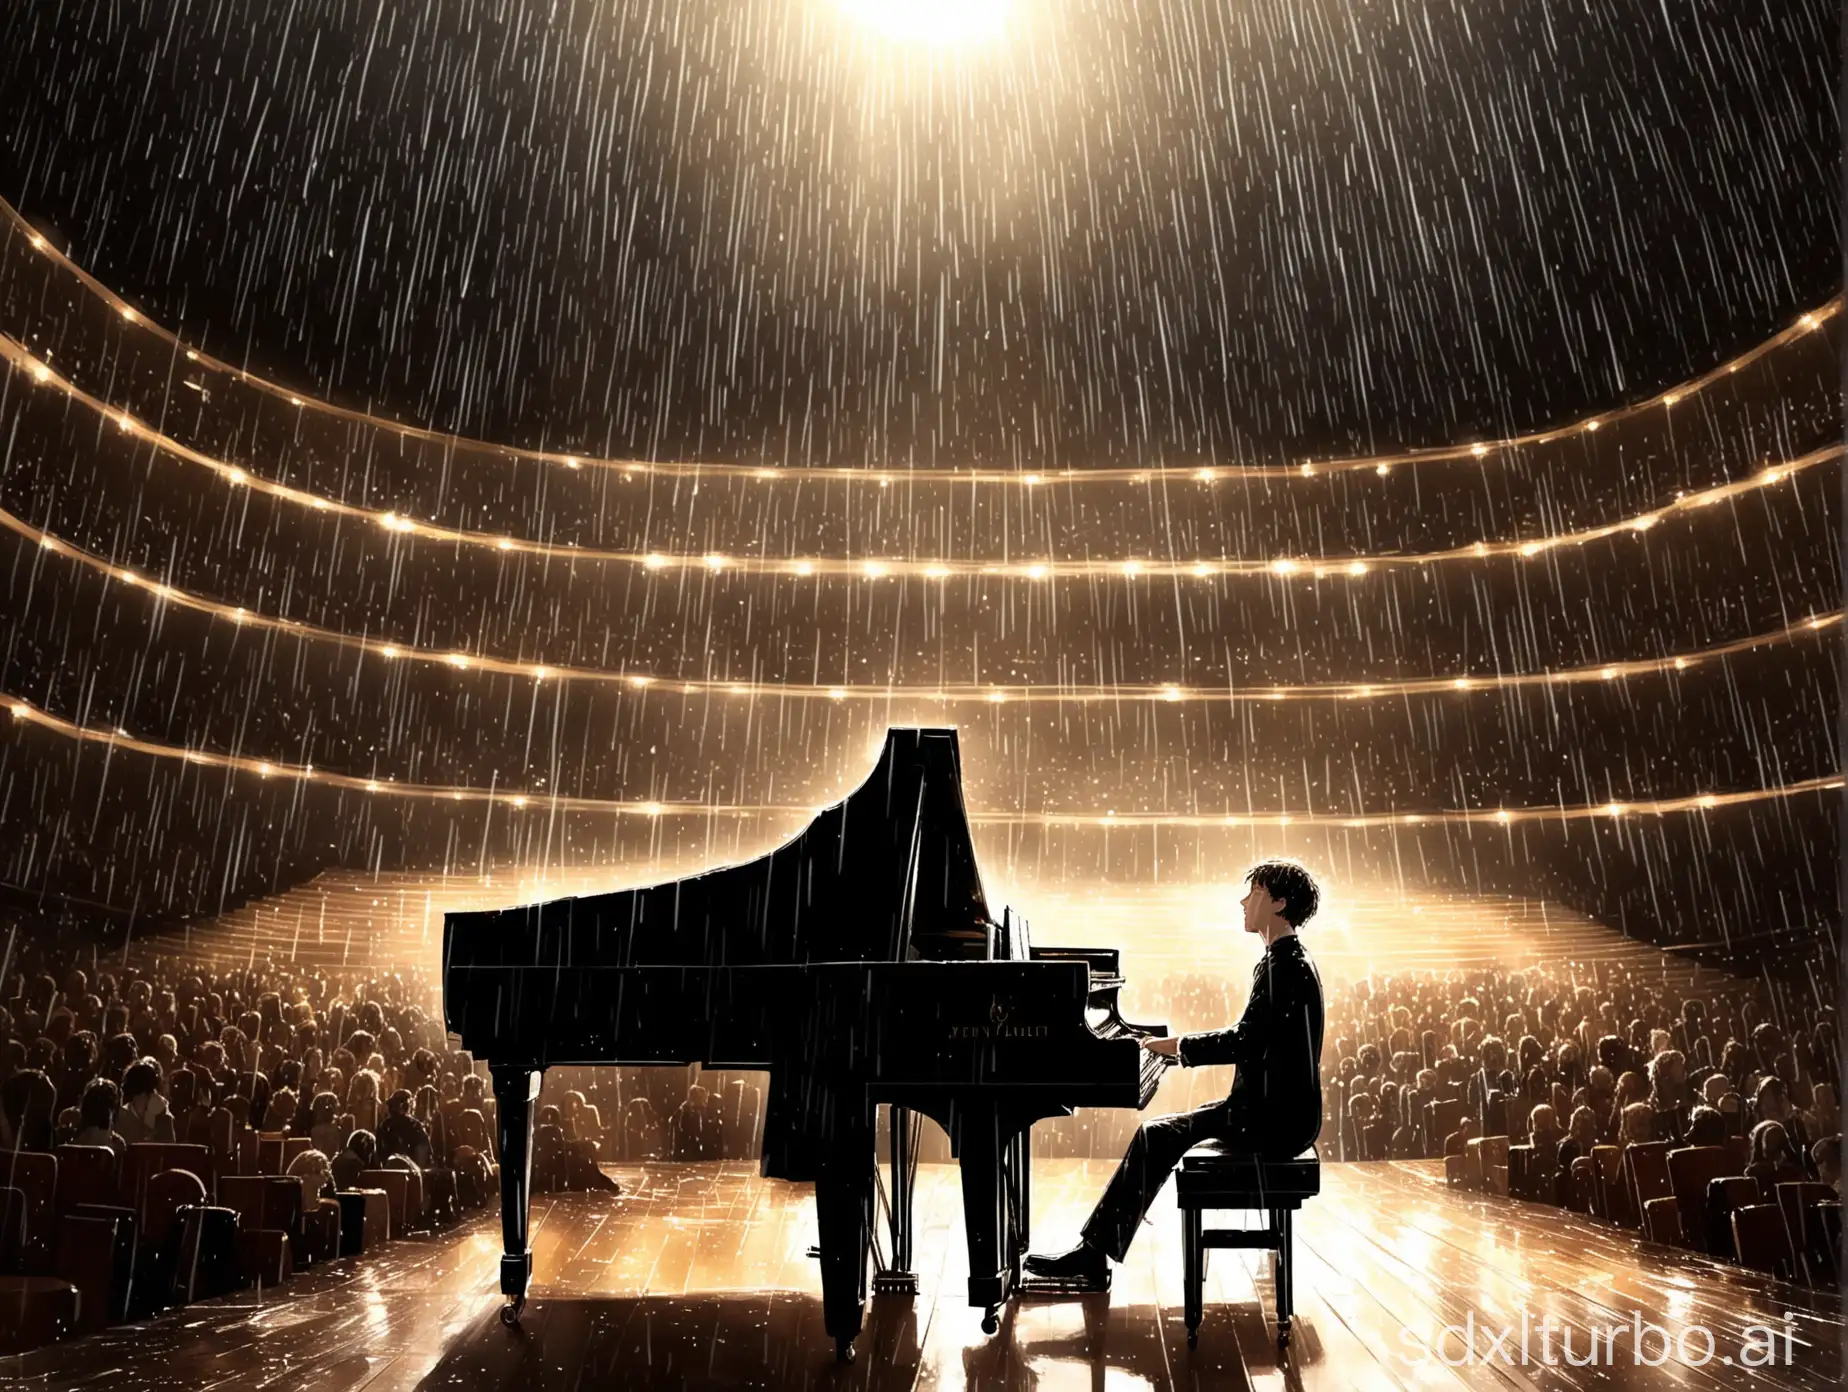 When the pianist pressed the last key of the song, he looked back out of the concert hall, where the rain had already passed, and the sun was shining on the faces of the audience, making the tears in their eyes